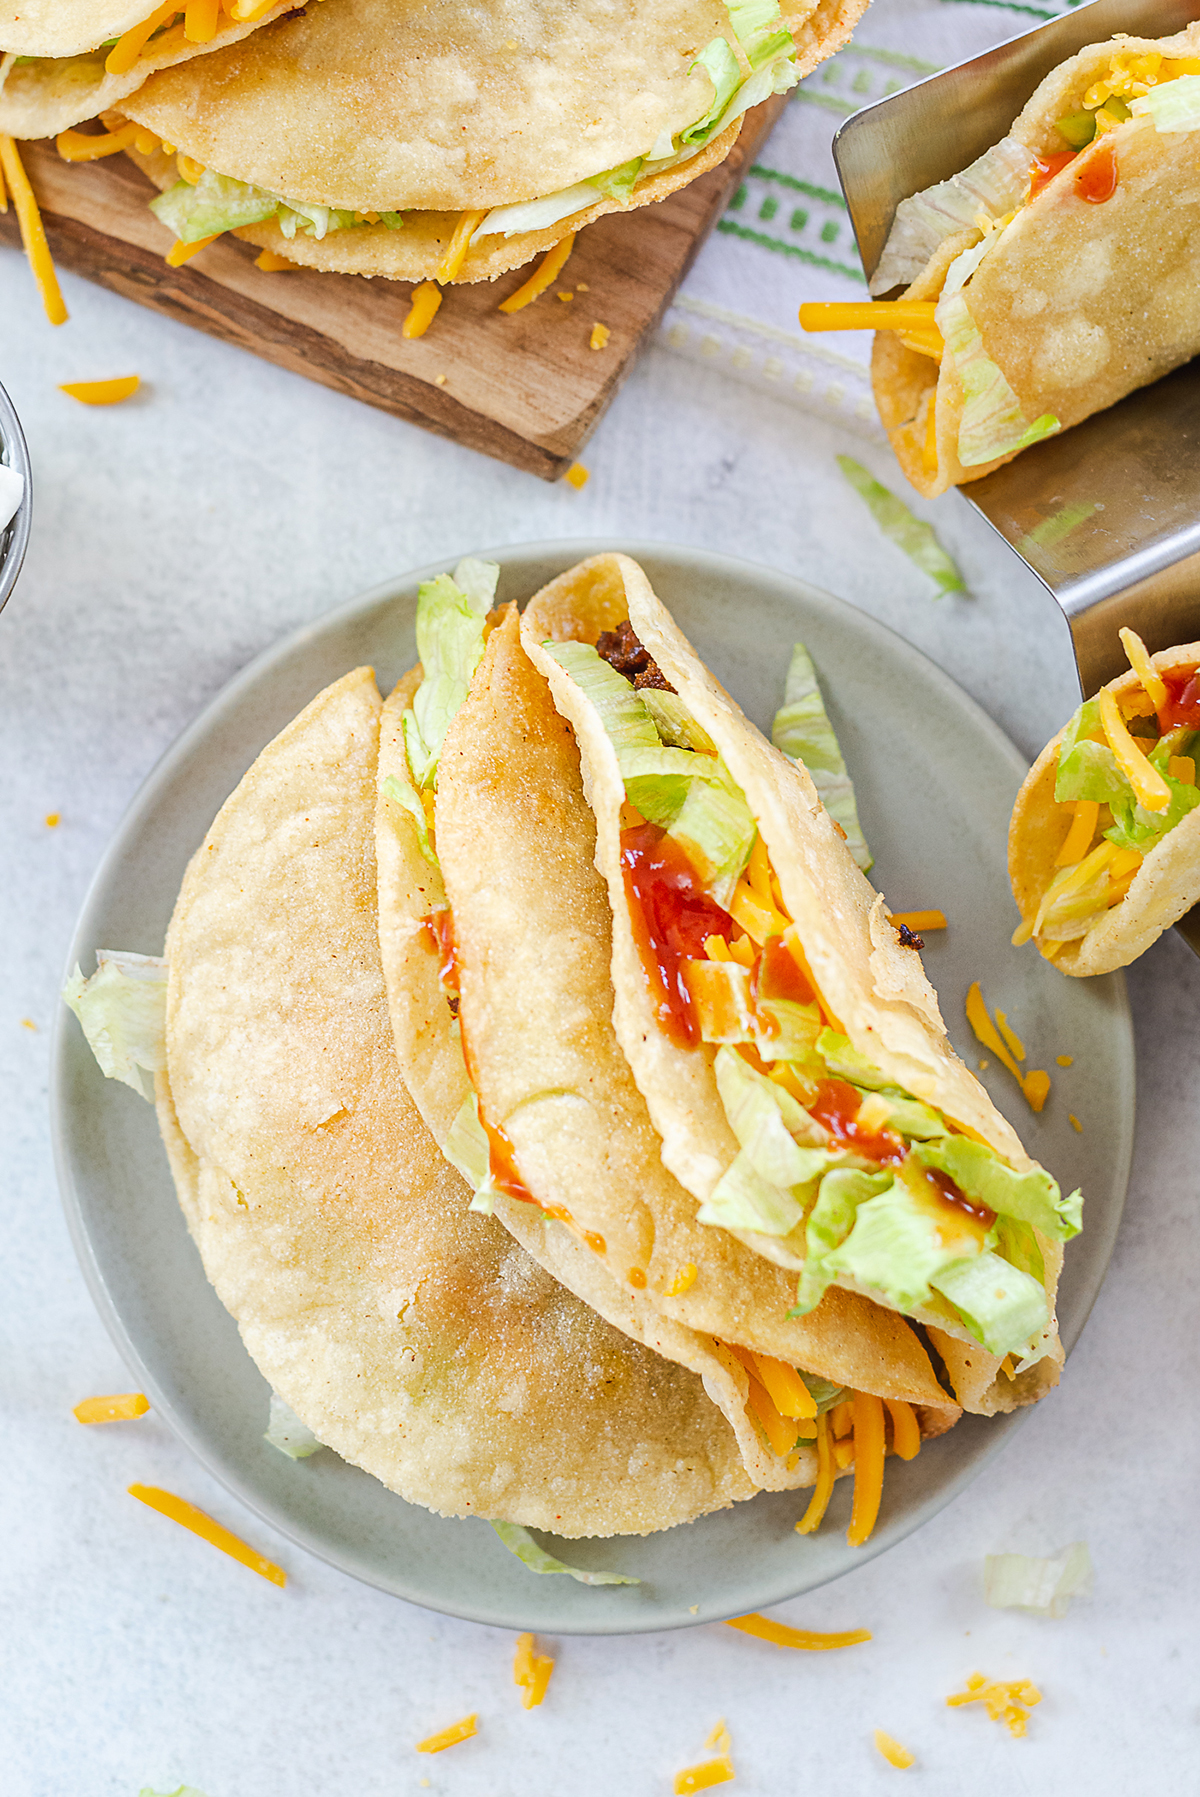 The BEST fried taco recipe...a copycat of Jack in the Box's crispy tacos! My family begs for these!